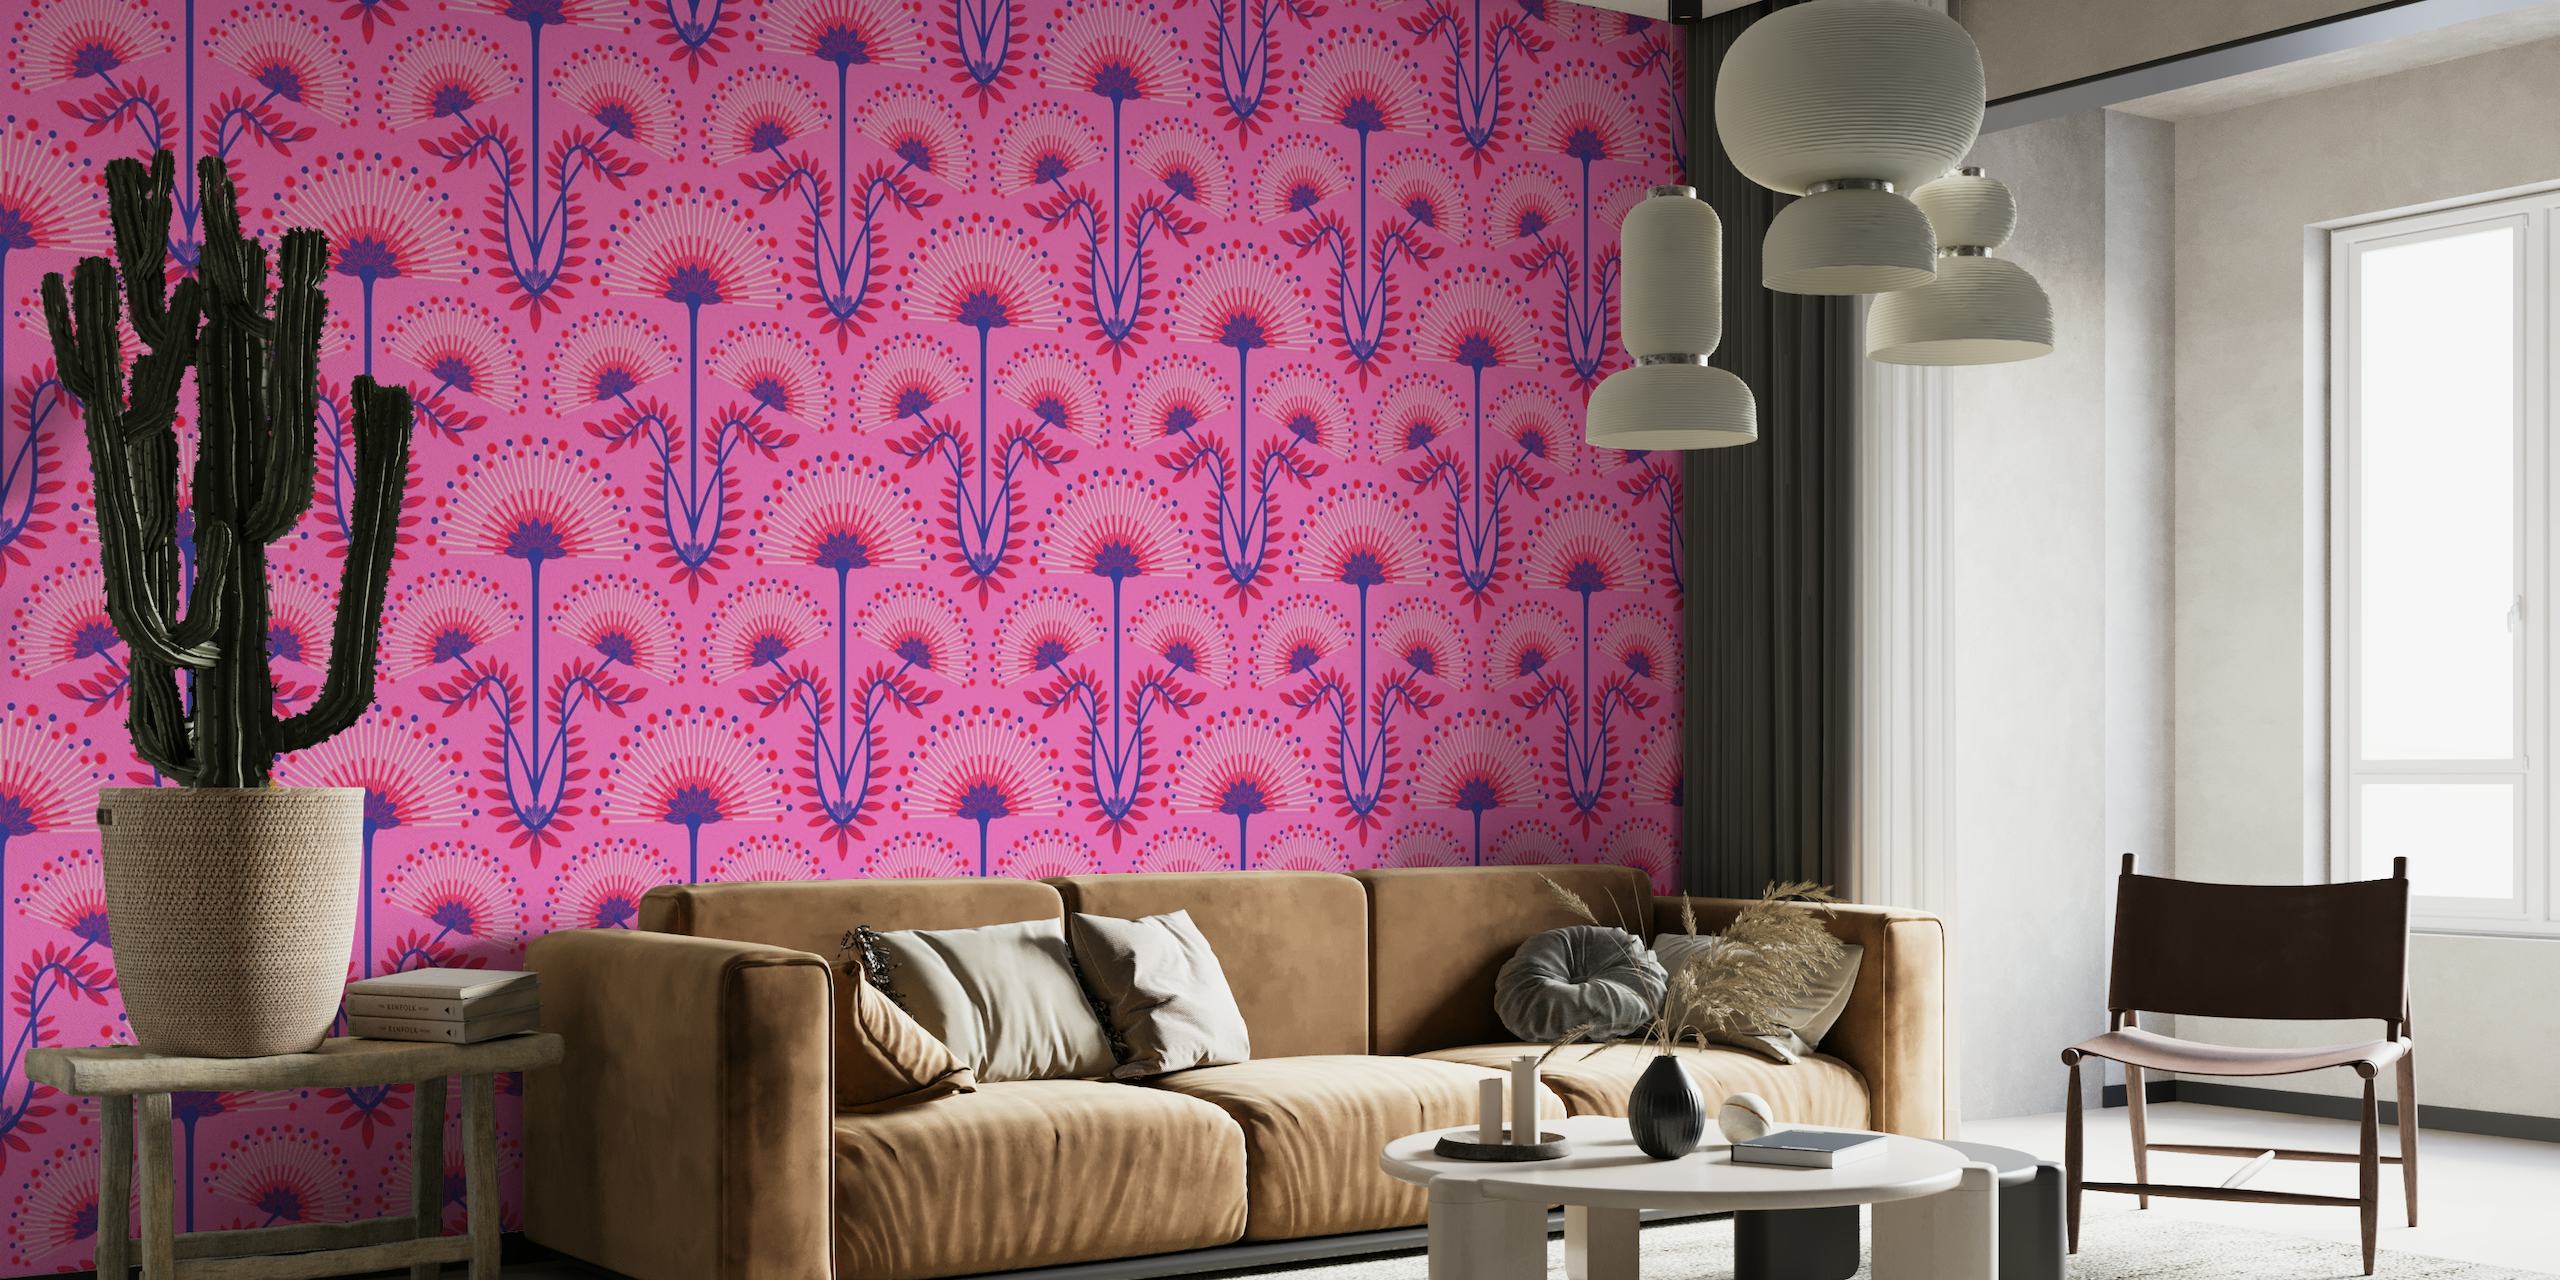 MIMOSA Art Deco Floral - Fuchsia Pink - Large behang